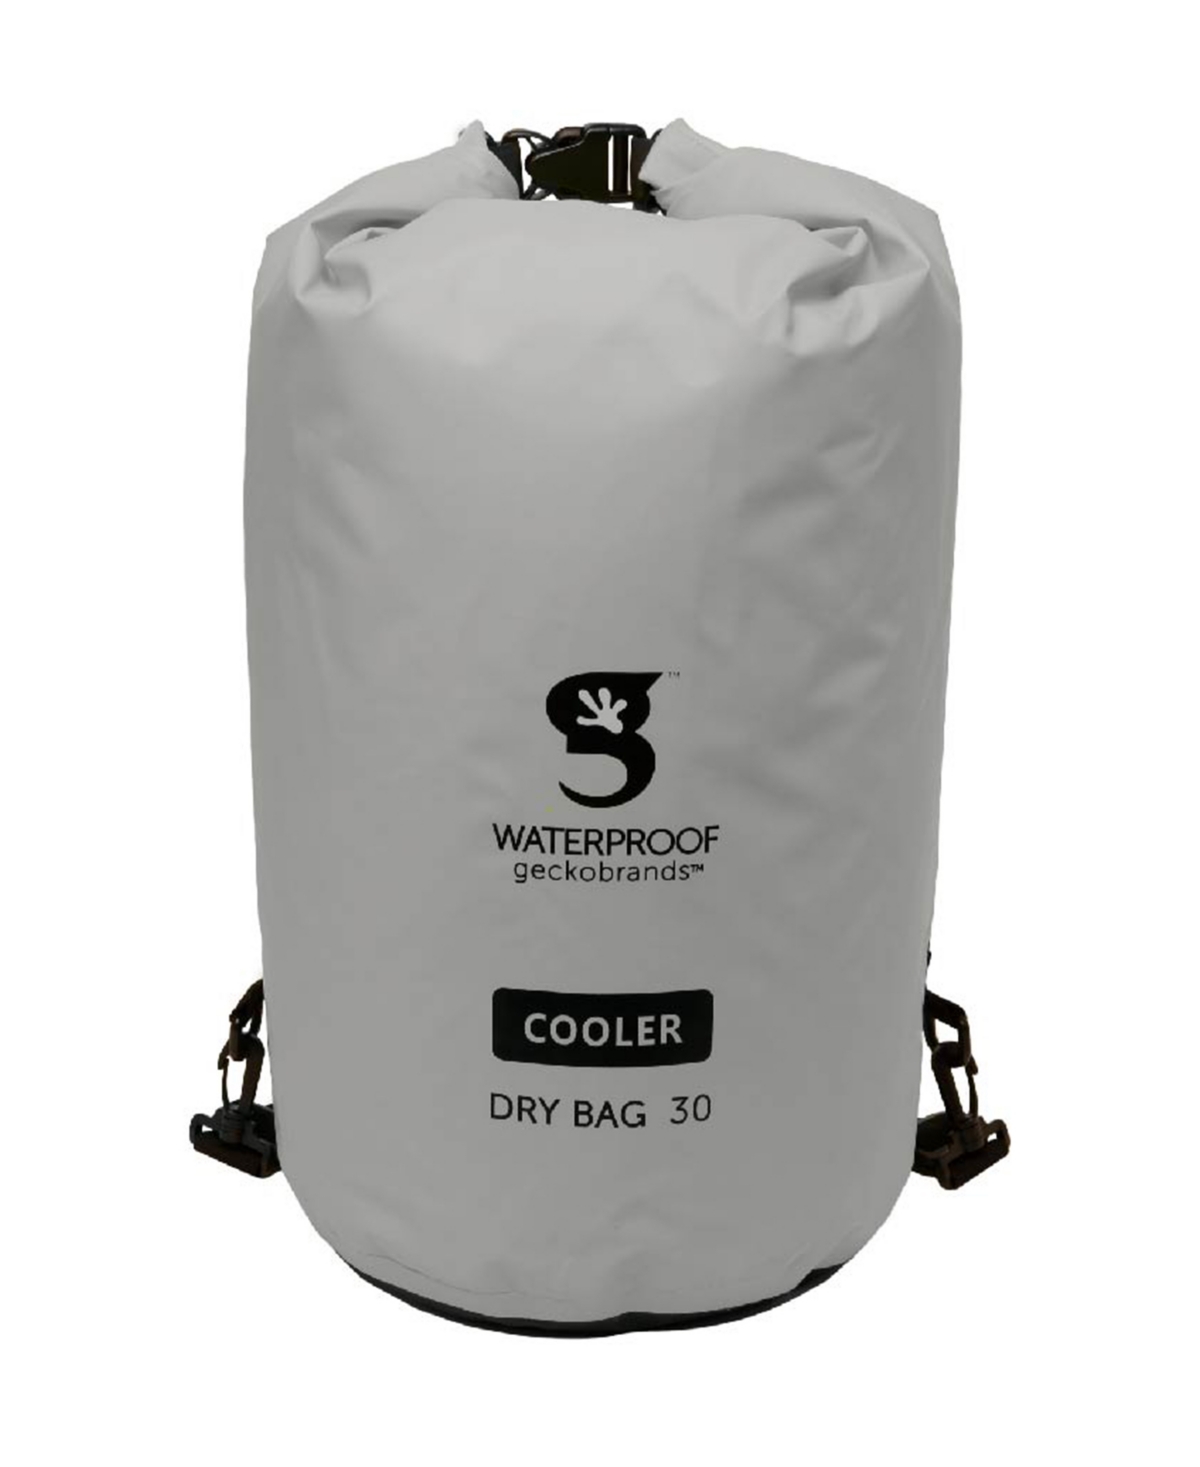 Geckobrands 30 Liters Dry Bag Cooler With Straps In Gray